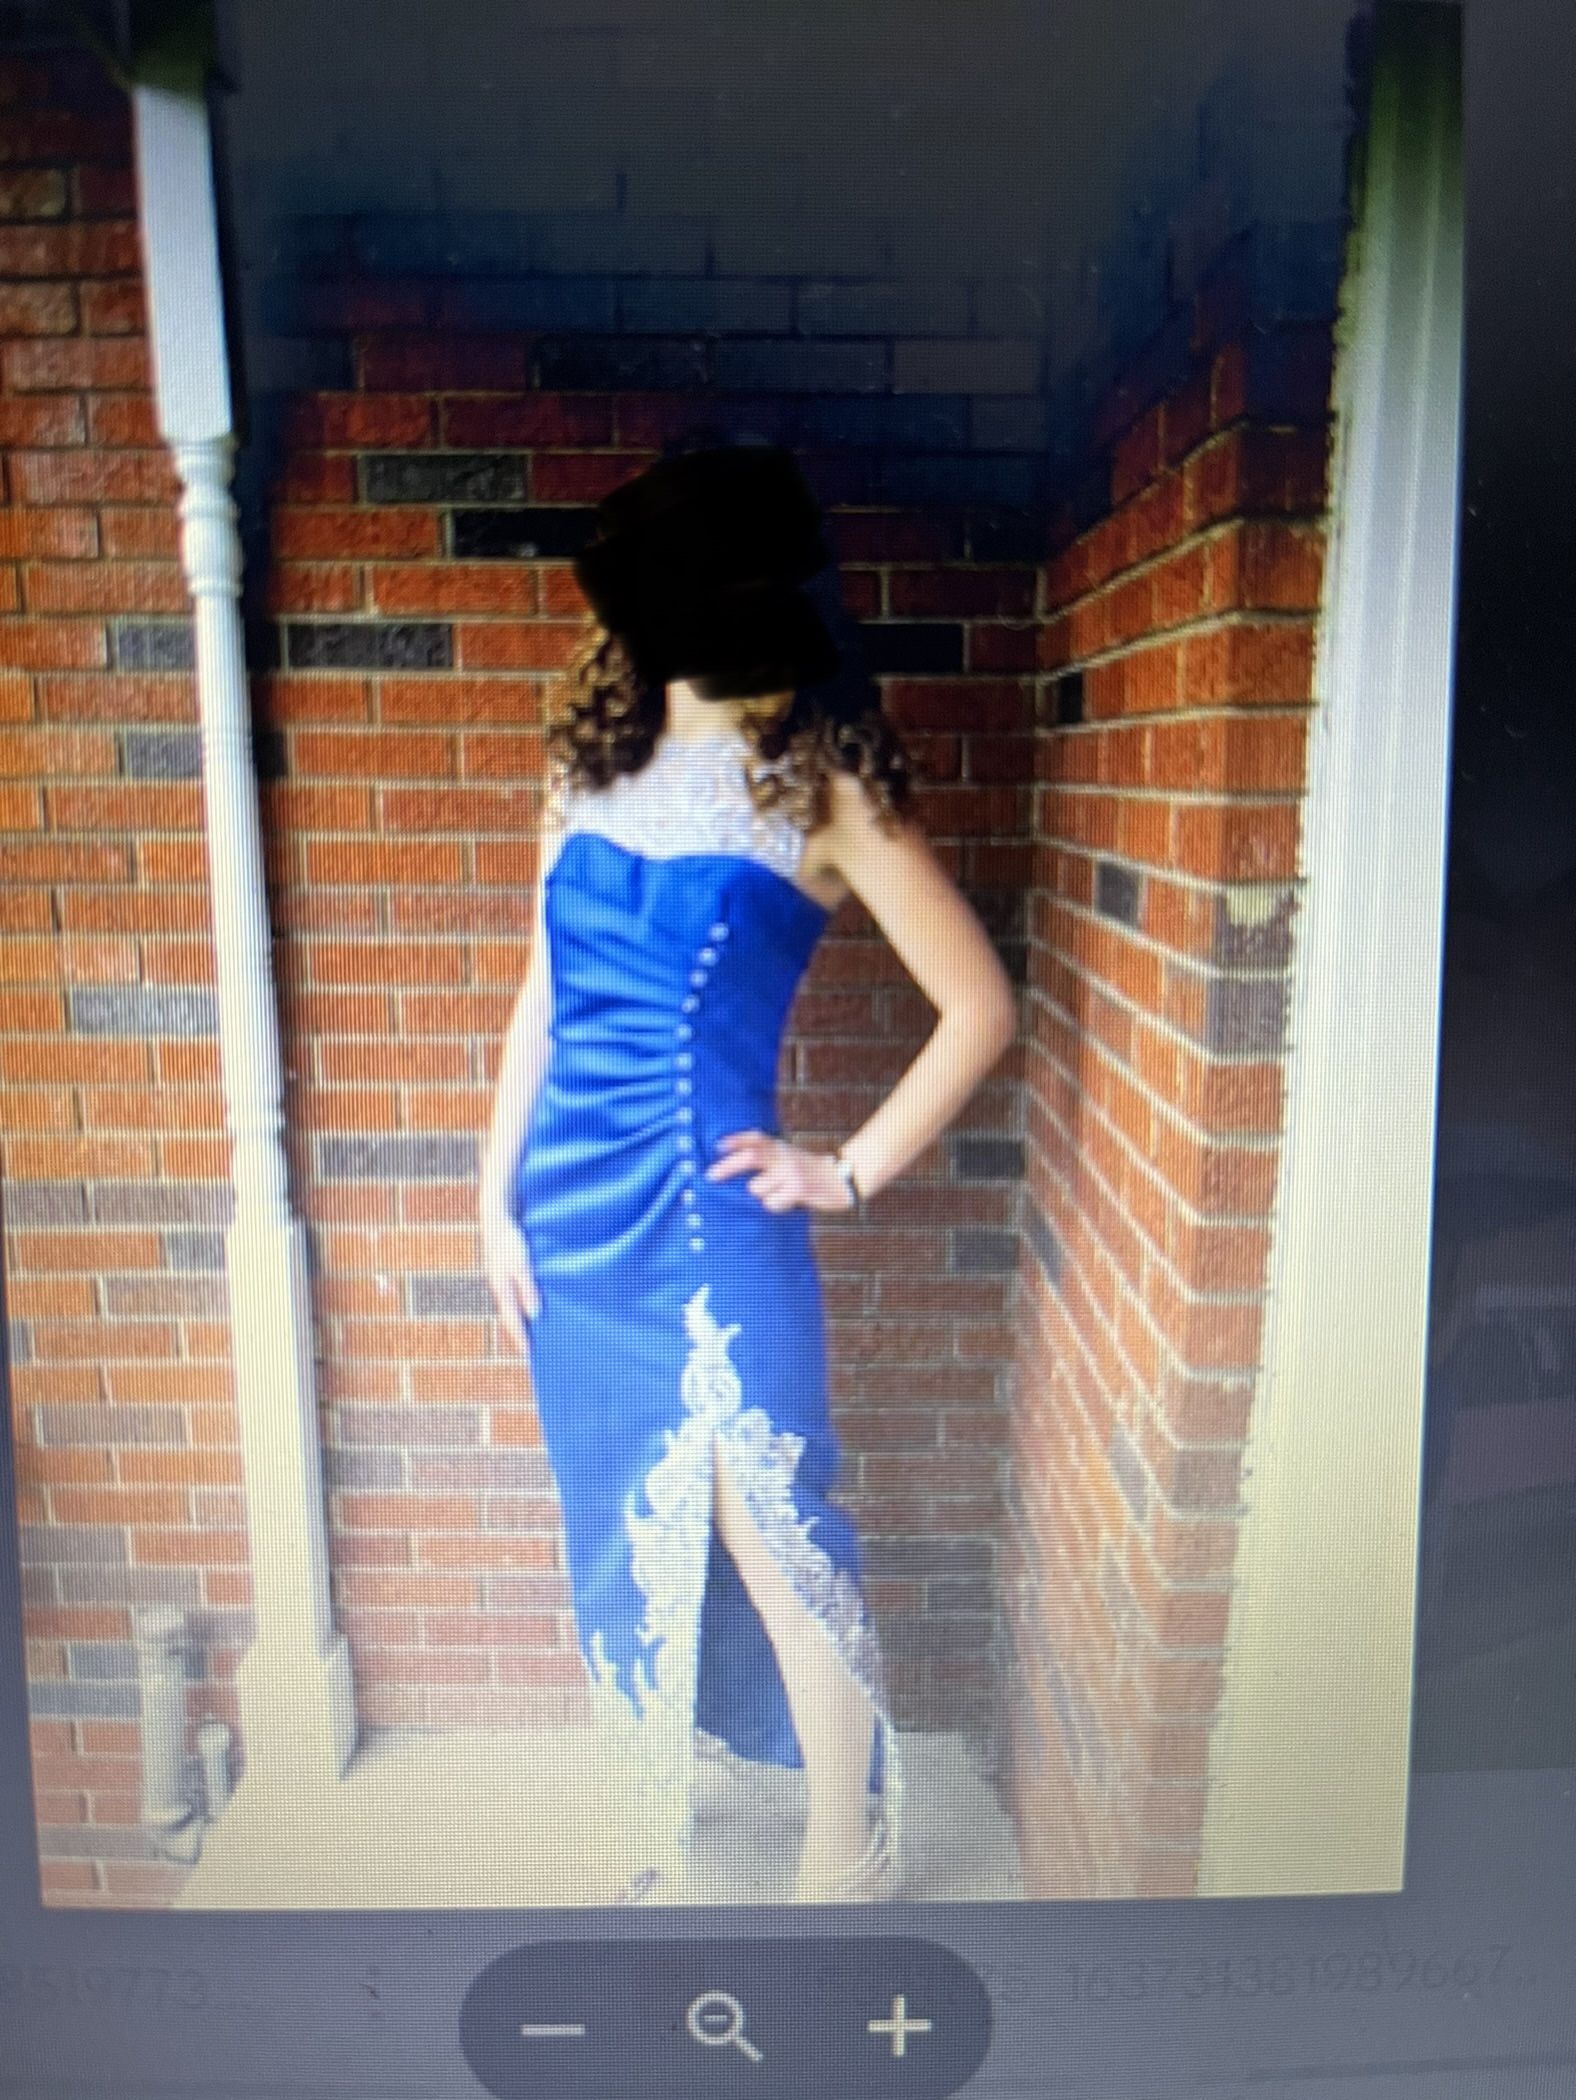 Prom Dress Approx. Size 4-6